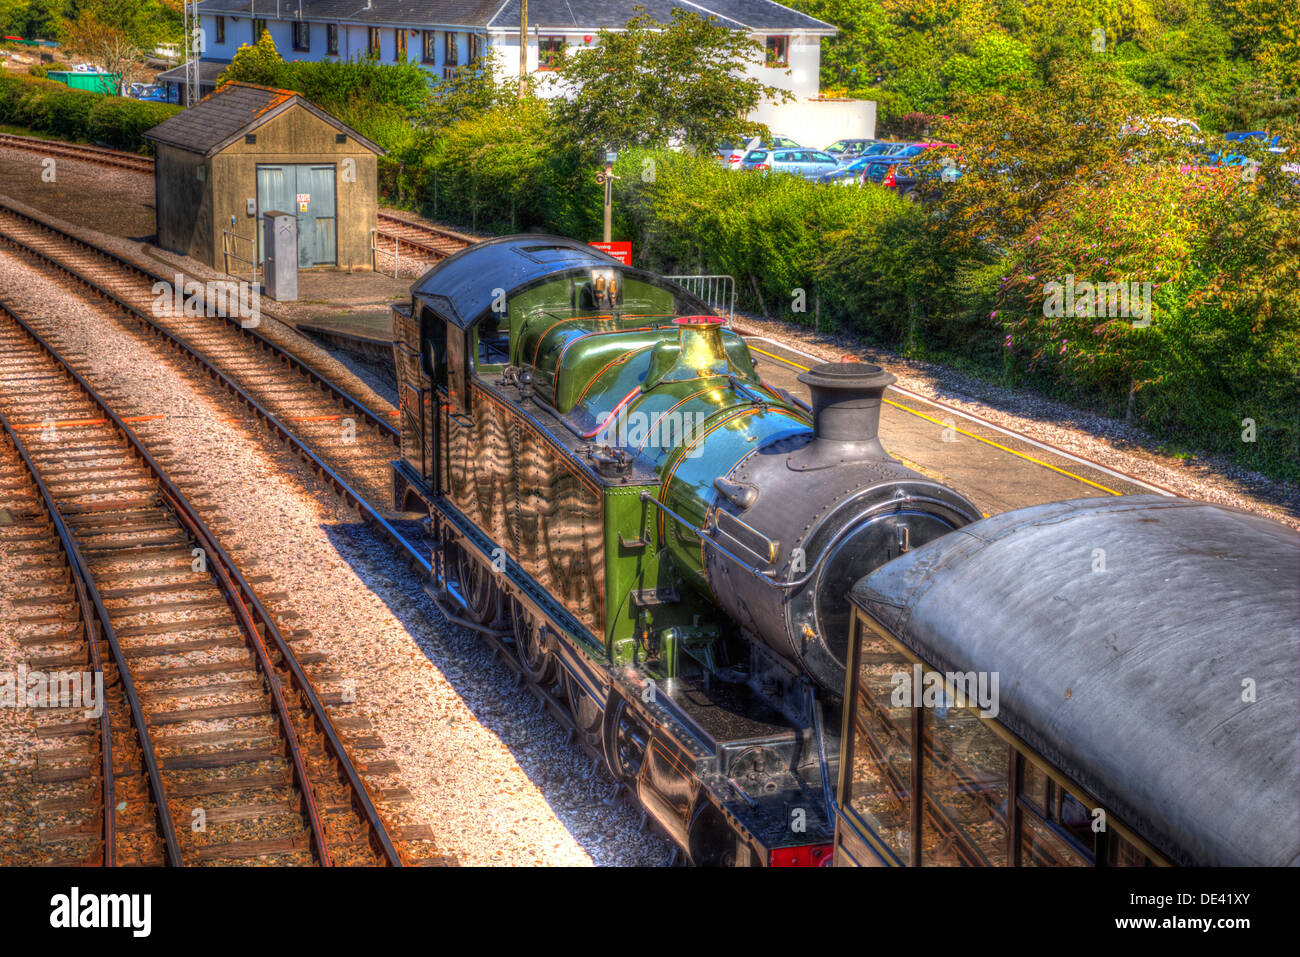 Steam Train engine in station with railway tracks in HDR like painting Stock Photo